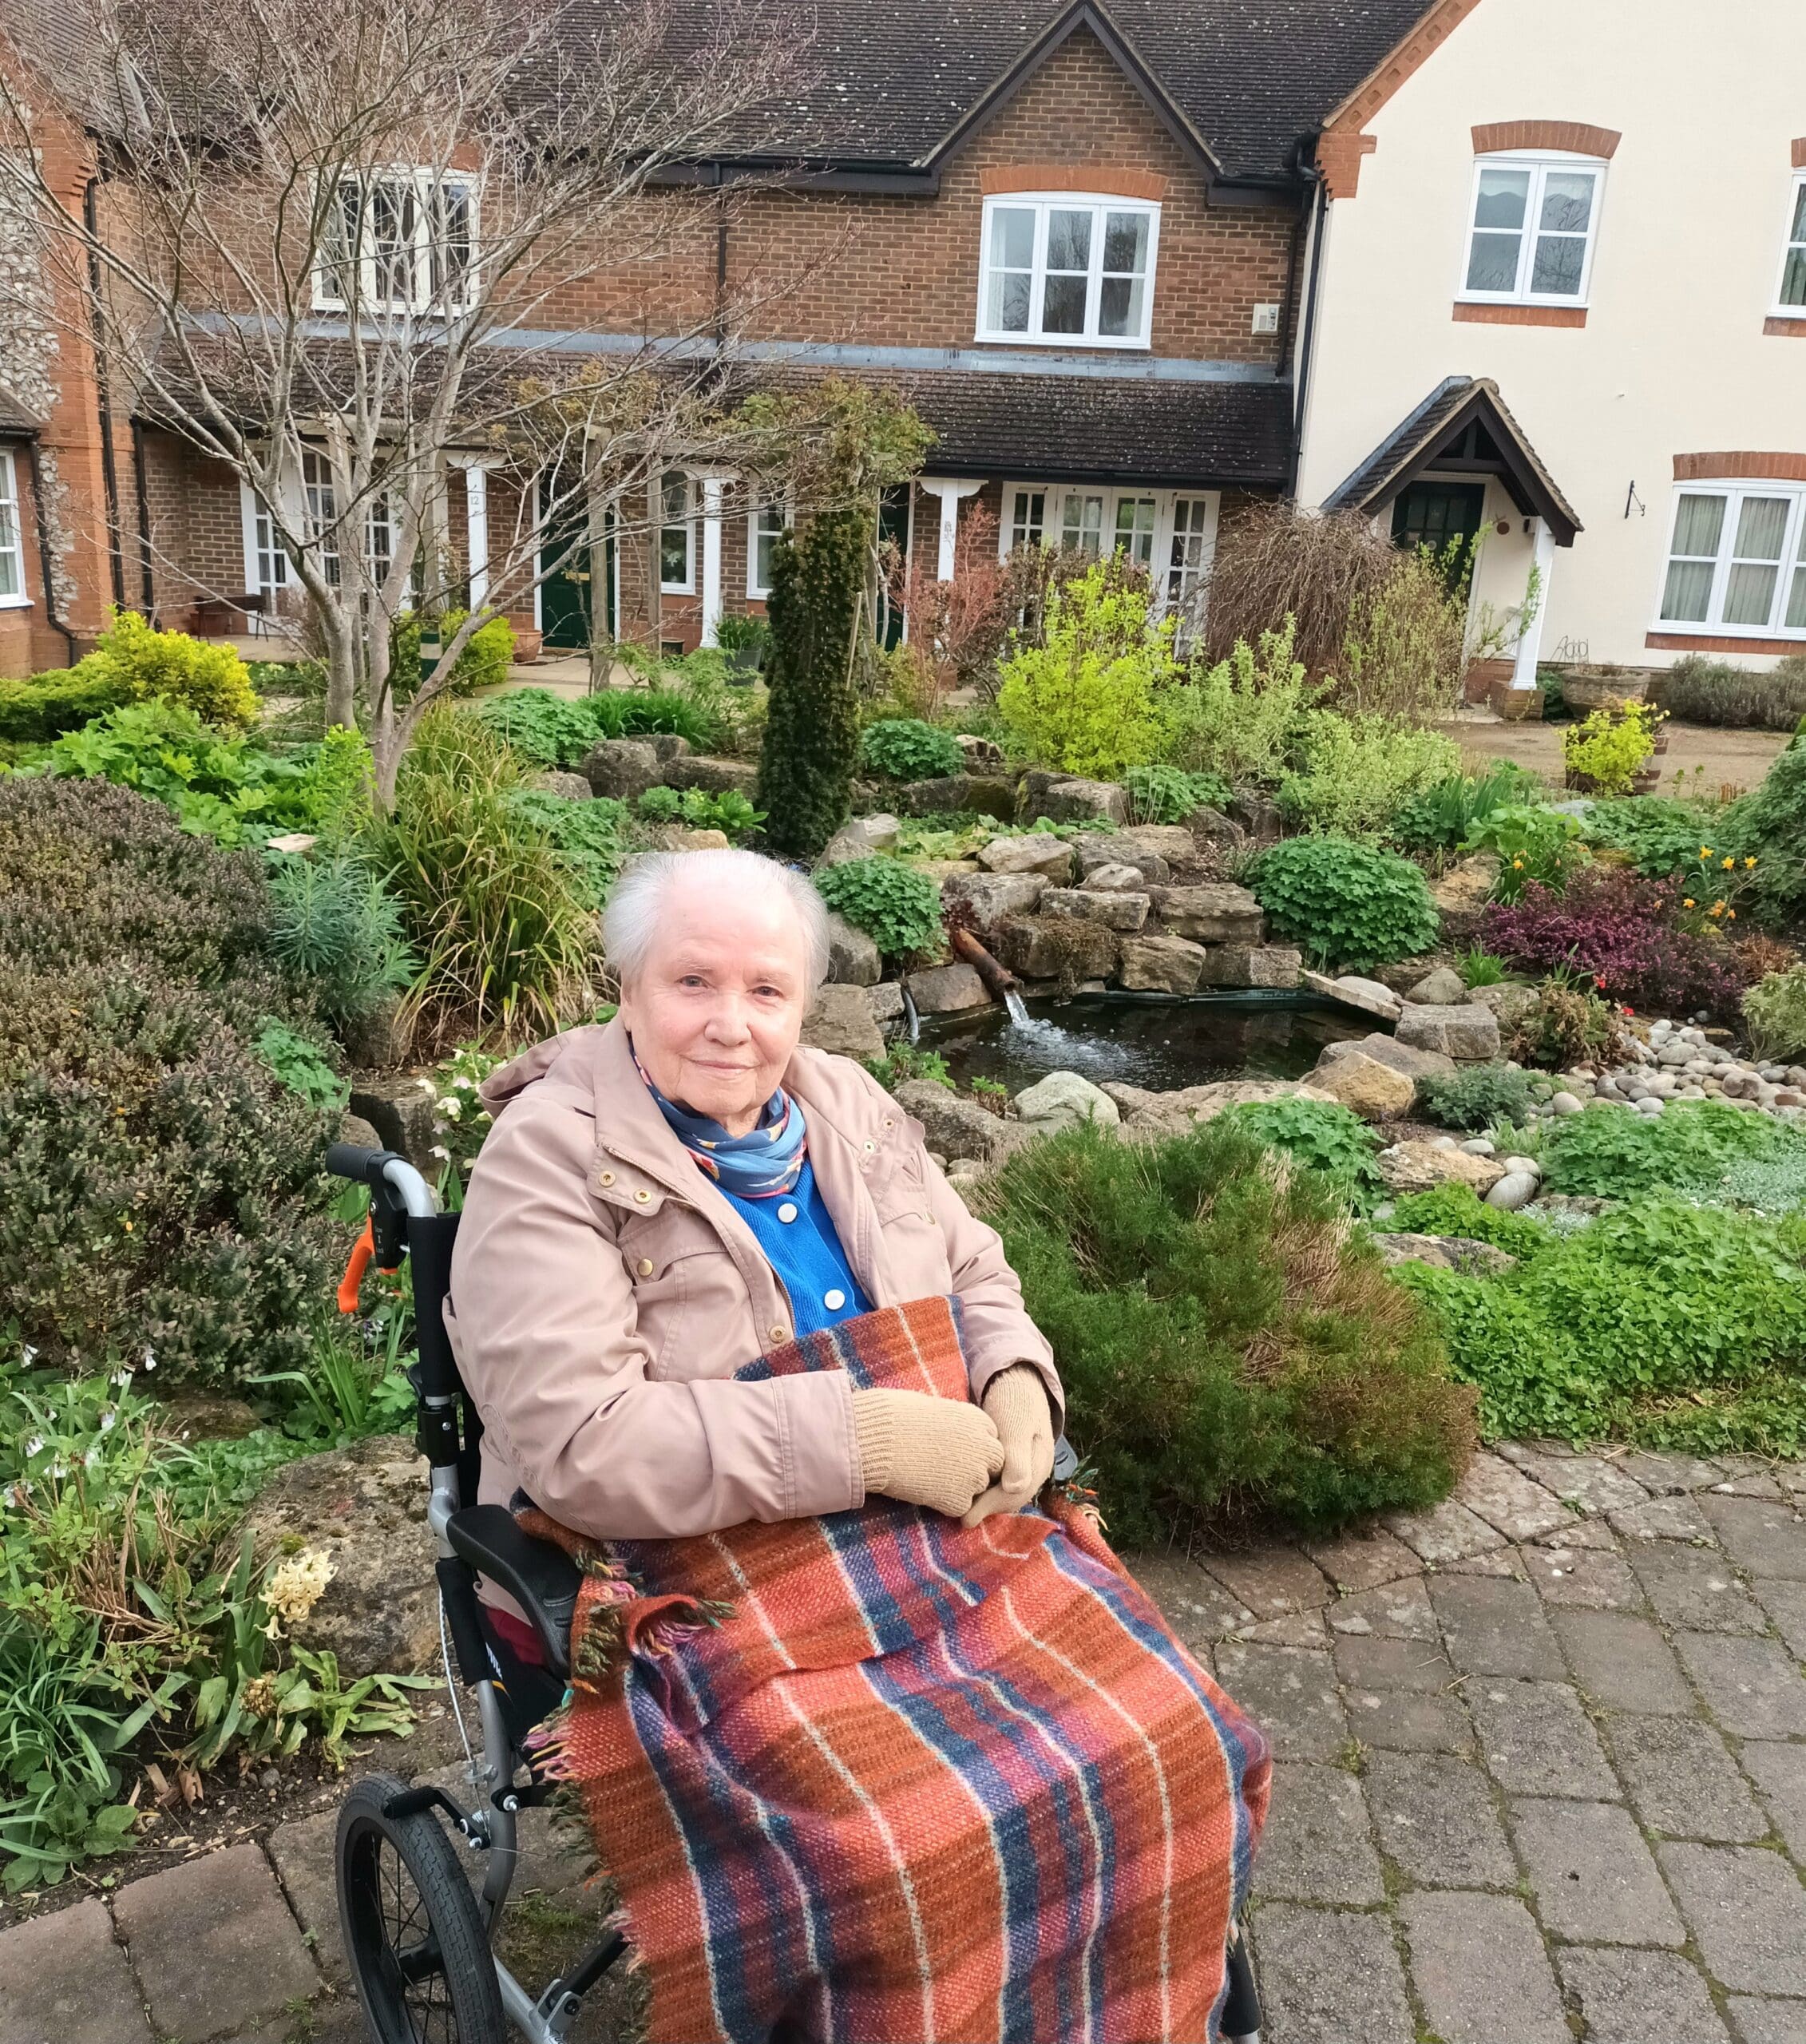 Good news story: Making a Difference with Home Care